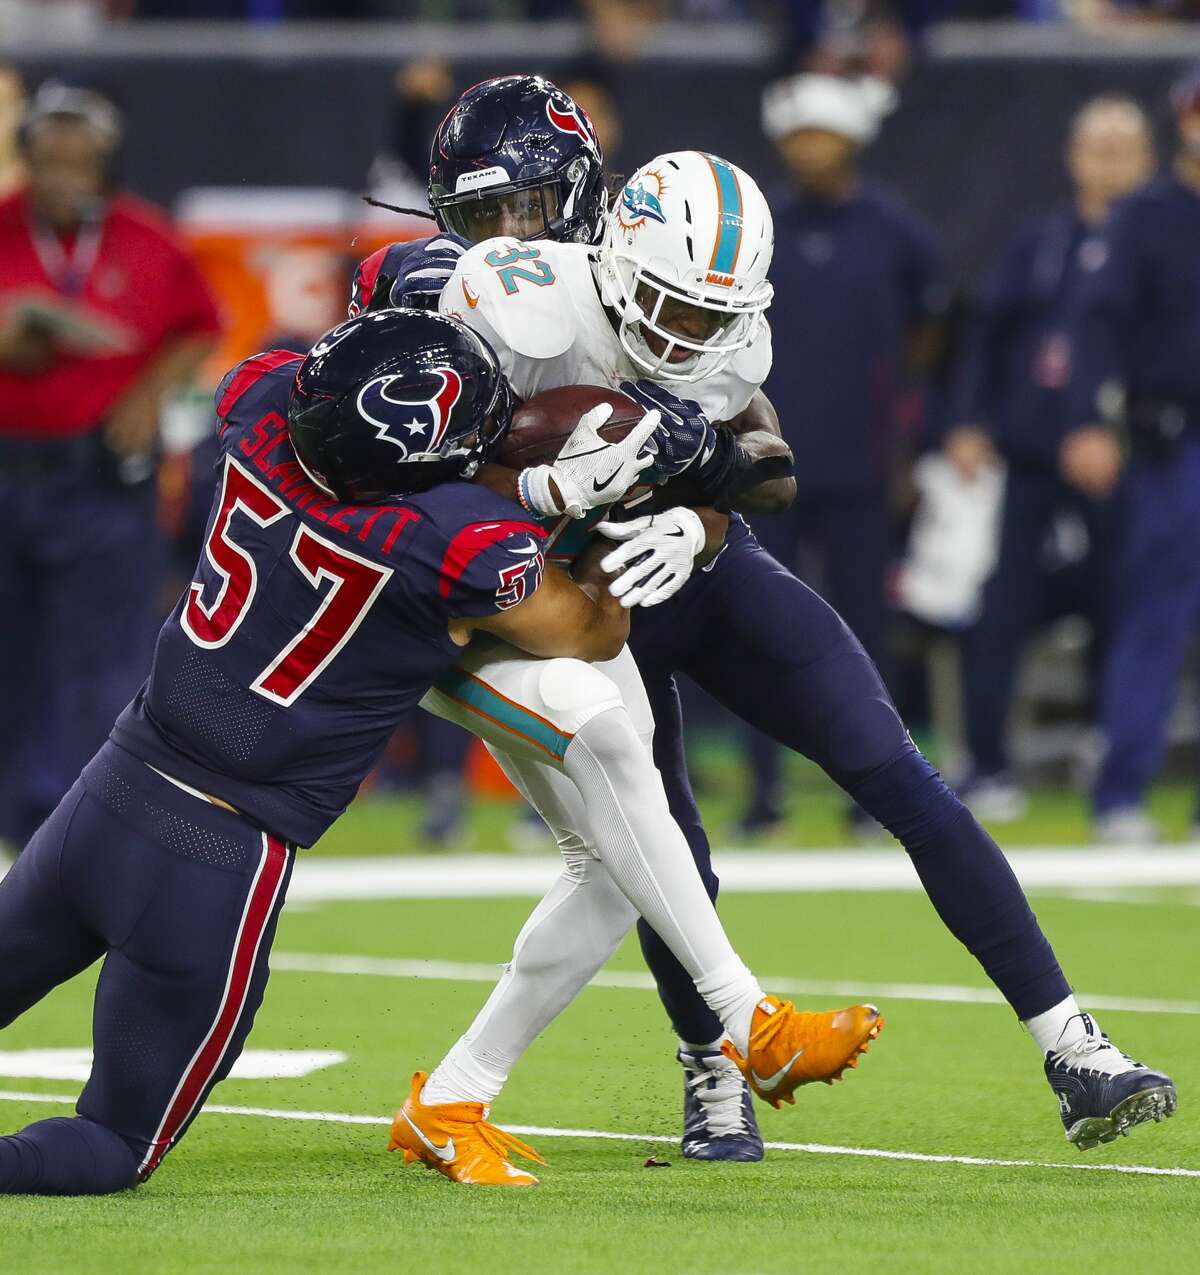 Miami Dolphins running back Kenyan Drake (32) is tackled by Houston Texans linebacker Brennan Scarlett (57) during the fourth quarter of an NFL football game at NRG Stadium on Thursday, Oct. 25, 2018, in Houston.